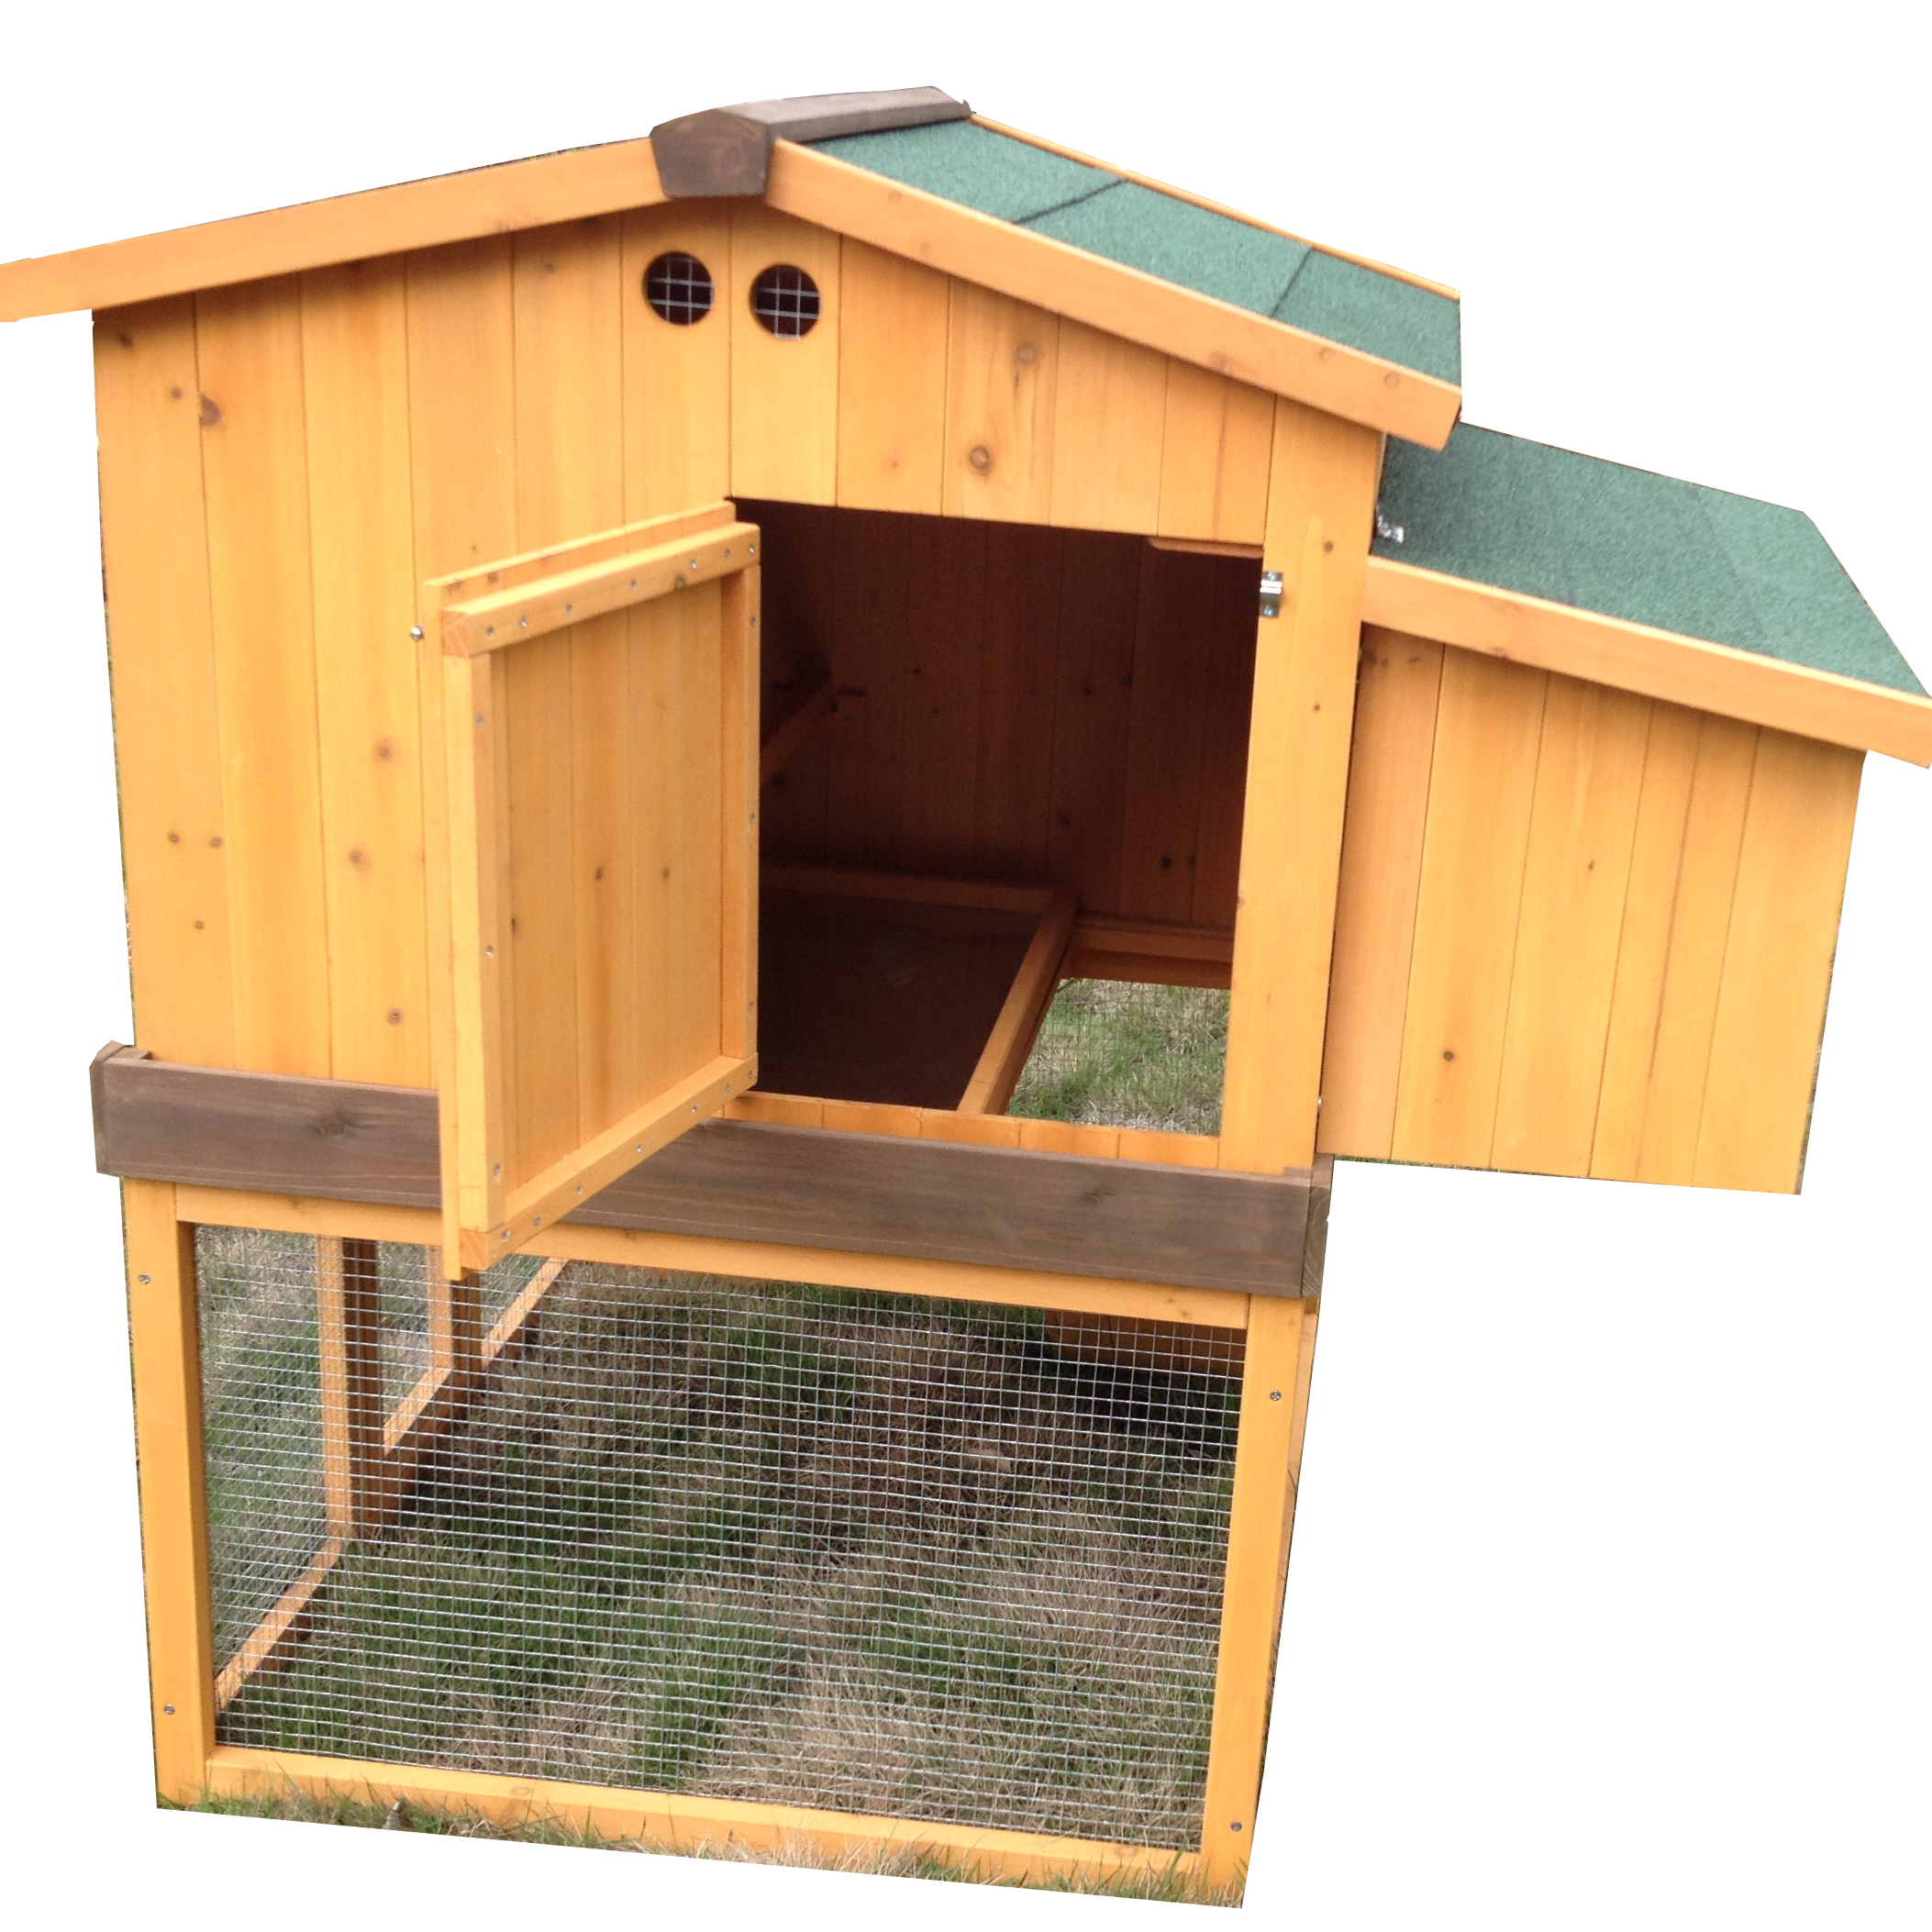 Poultry Farm Small Backyard Urban Build  Chicken Coop For Sale Nesting Boxes Tractor